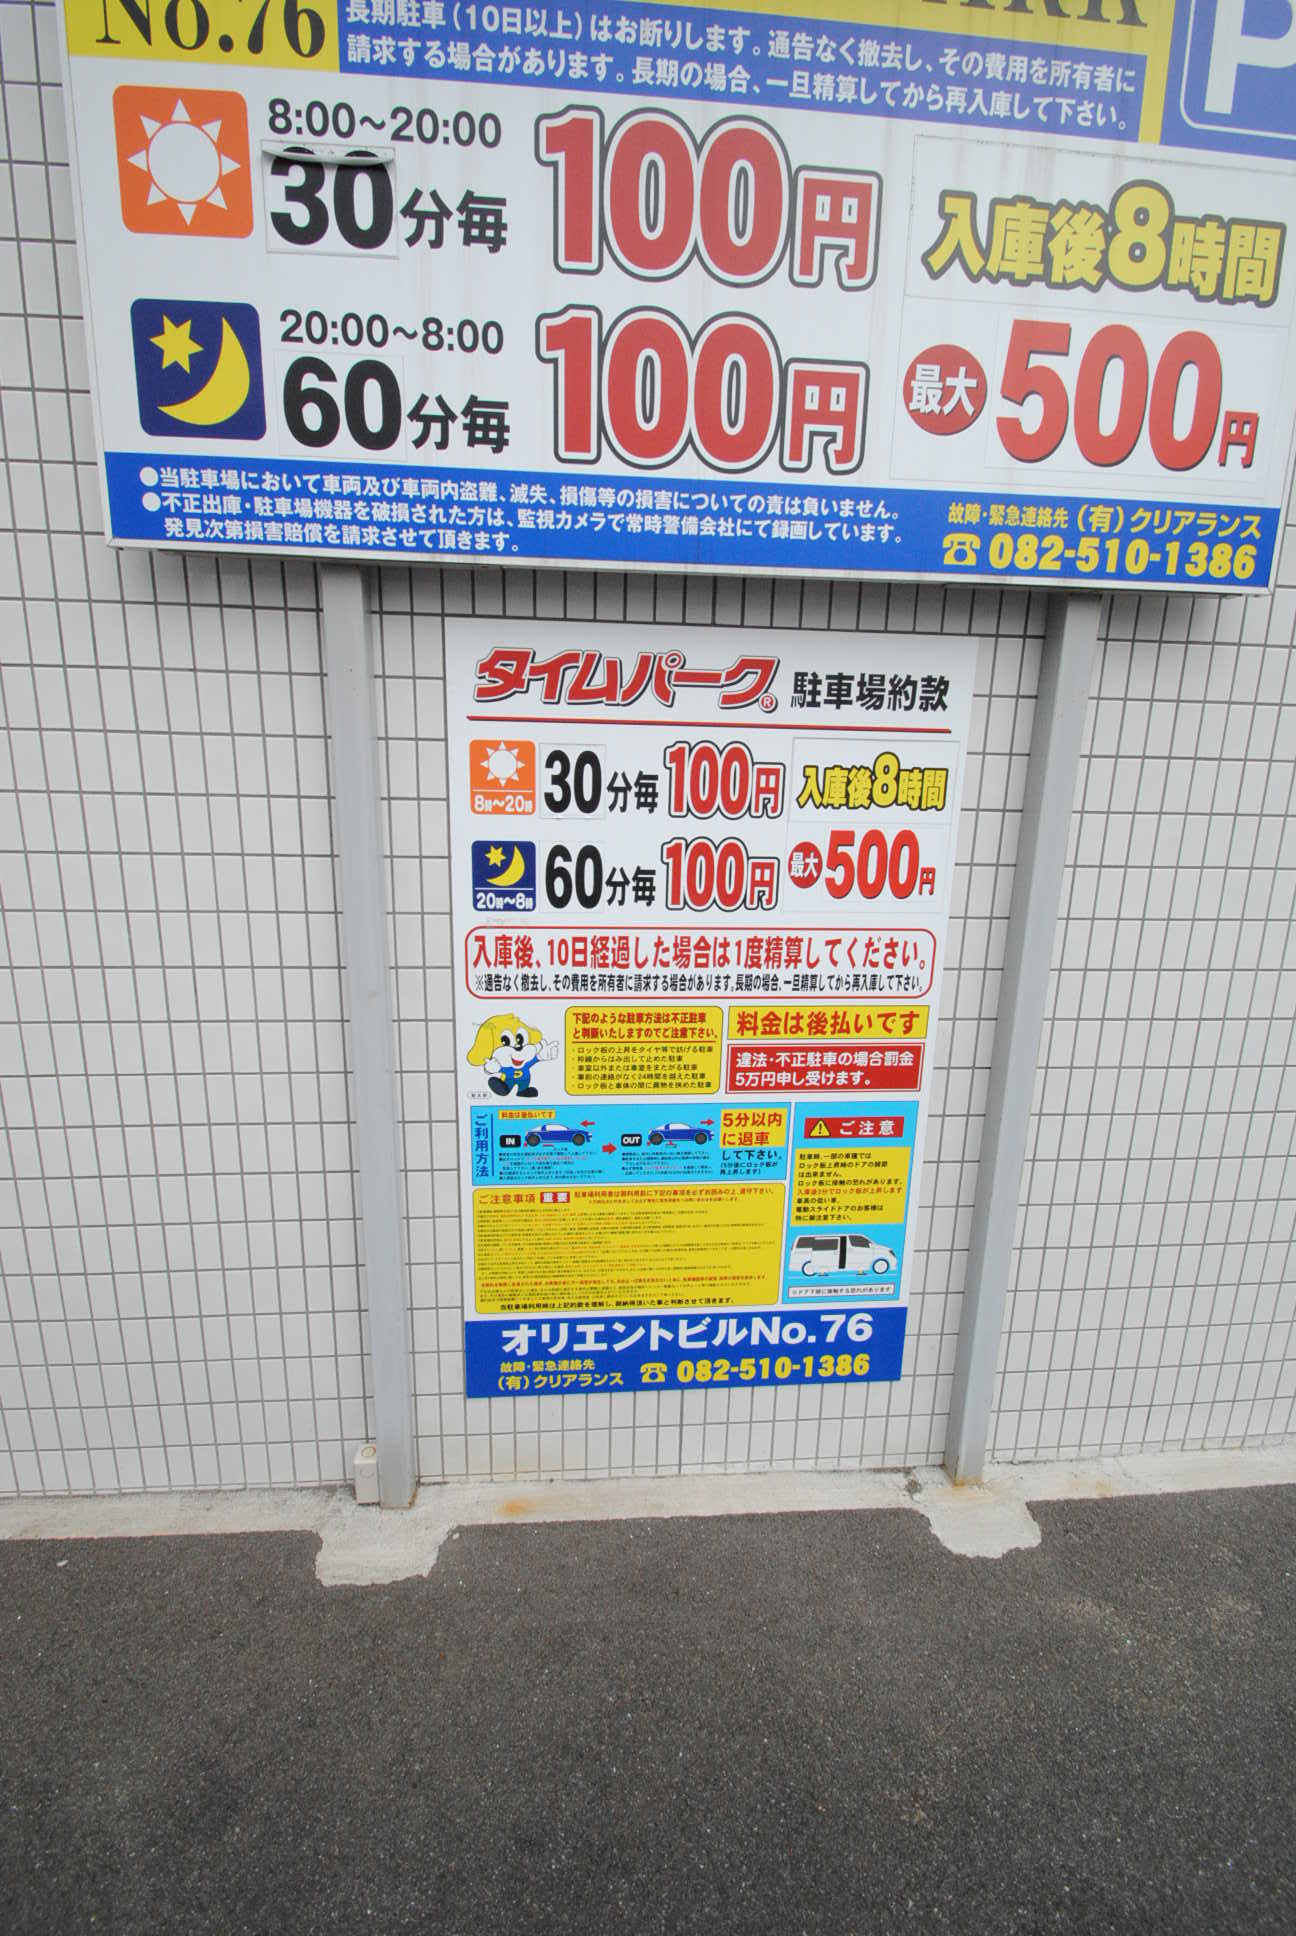 Other. Convenient because 100 yen parking is located on the first floor